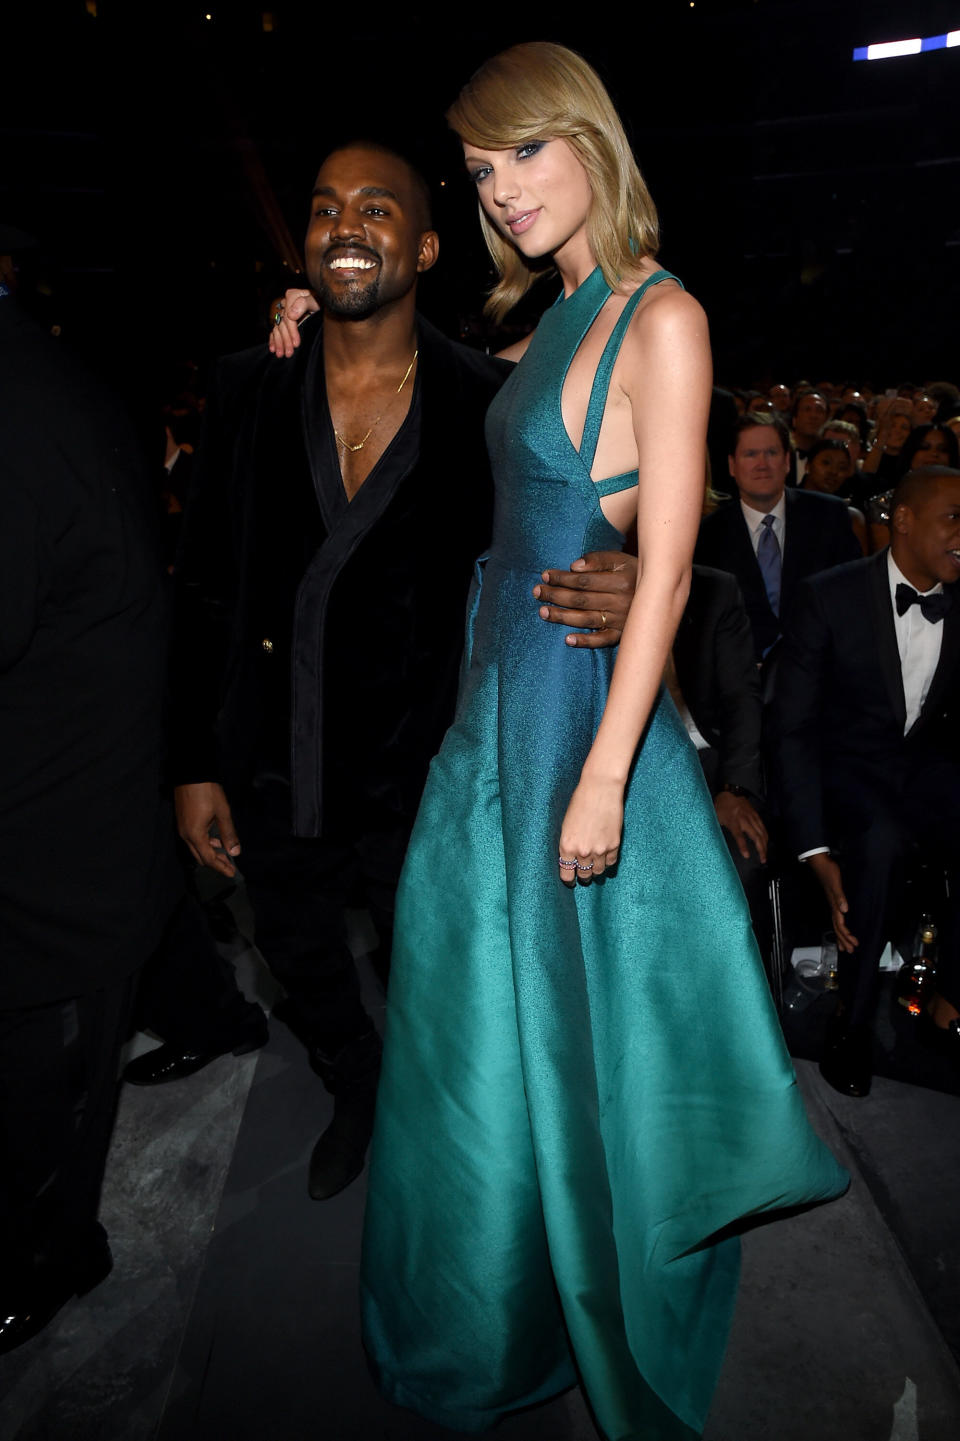 Kanye West and Taylor Swift pose for a photo together at the 2015 Grammys.&nbsp; (Photo: Larry Busacca via Getty Images)